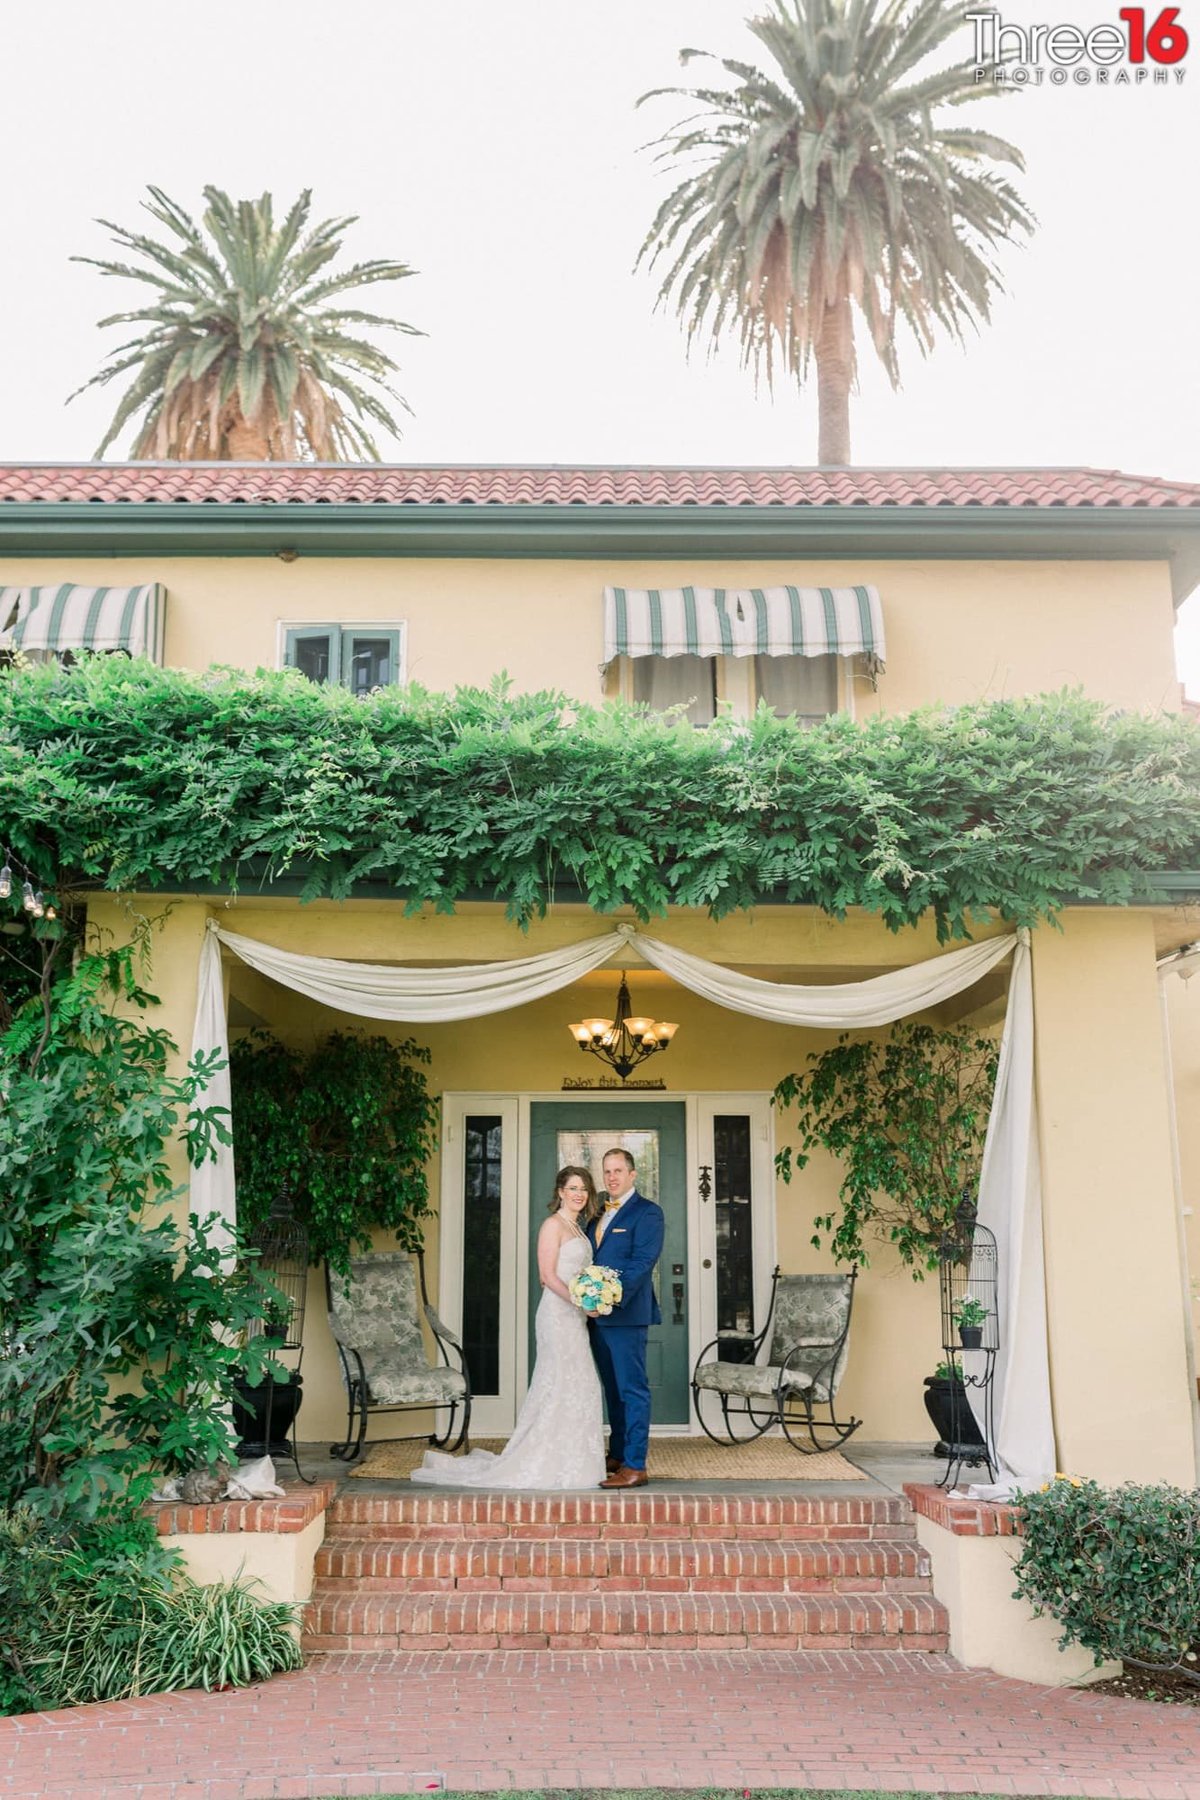 Newly married couple pose together in front of the French Estate wedding venue in Orange, CA